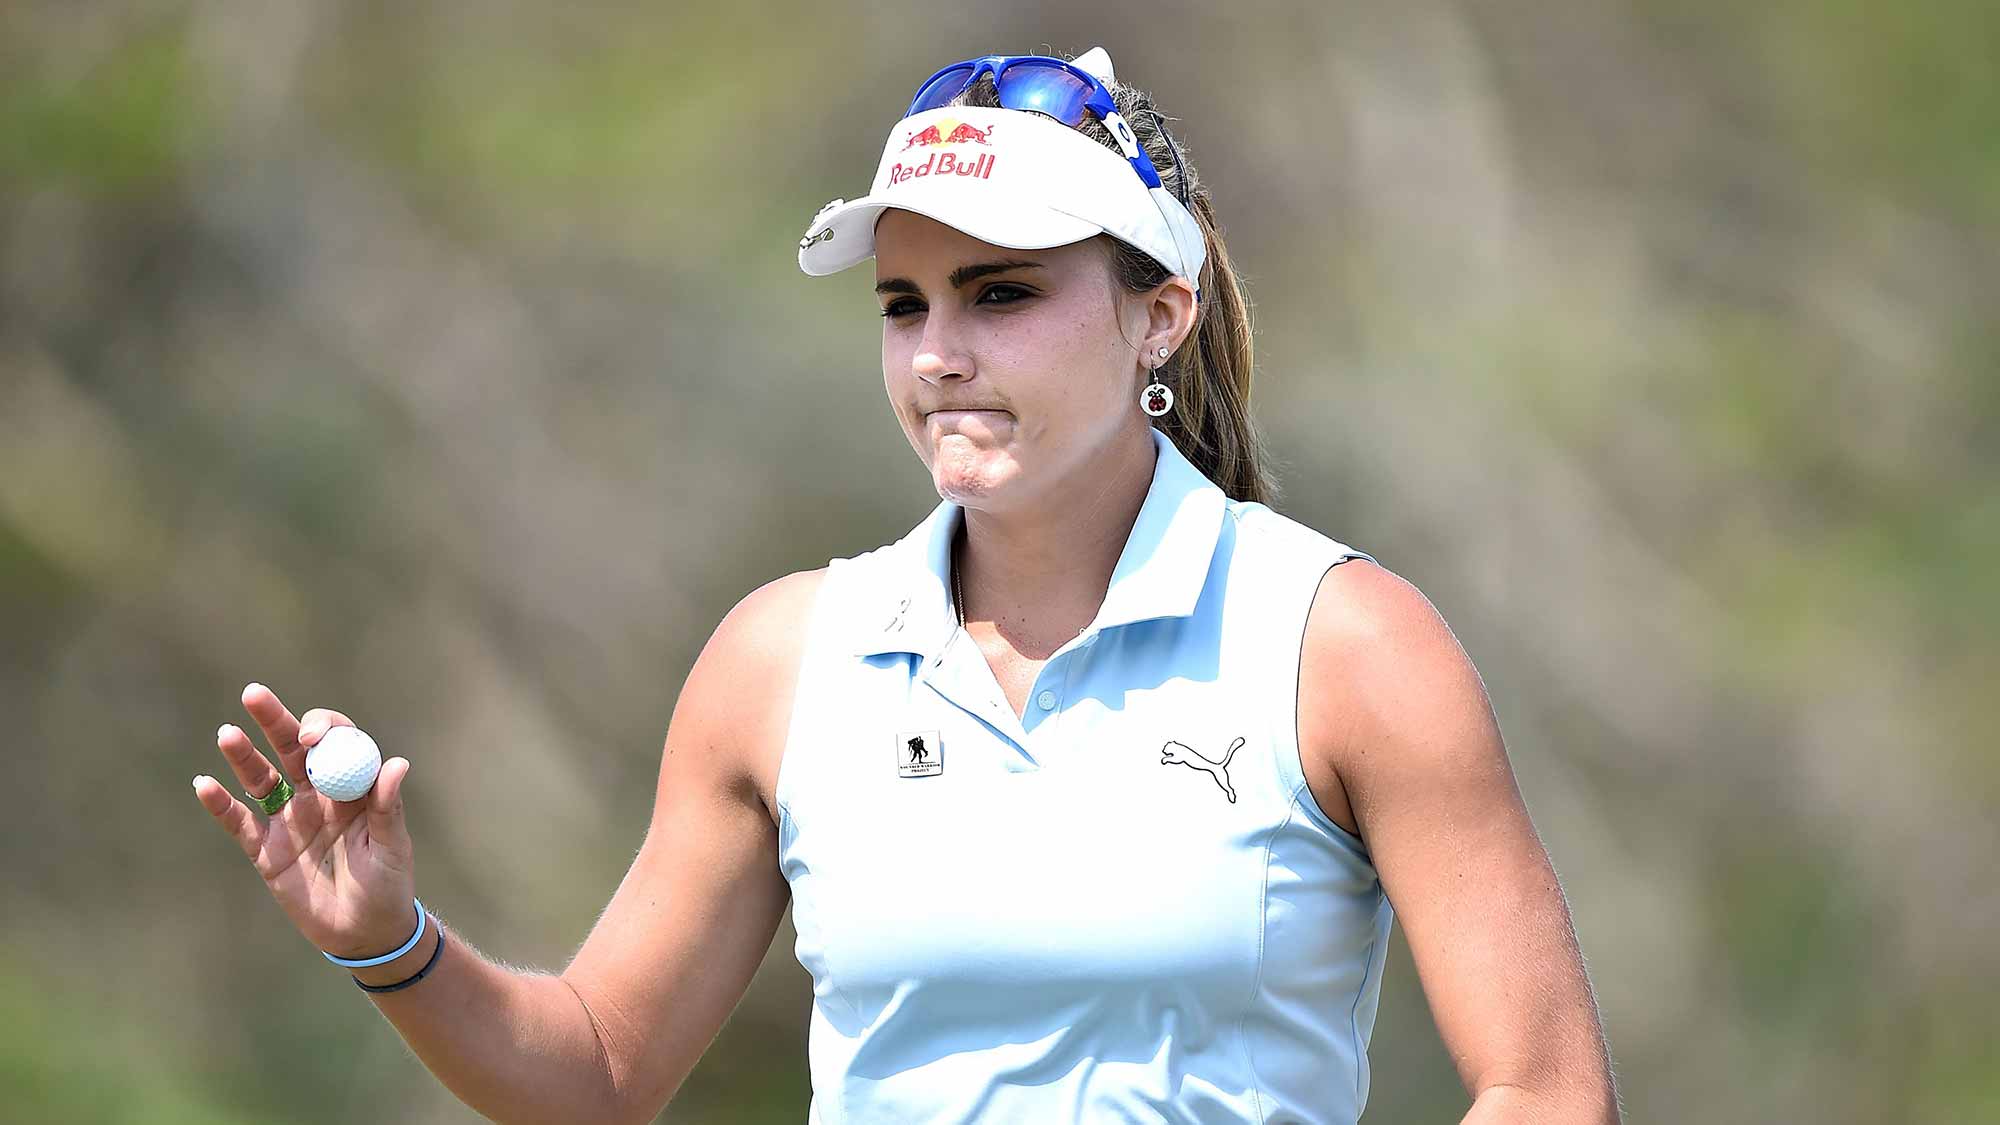 Lexi Thompson of United States acknowledges the fan during day one of the 2016 Honda LPGA Thailand at Siam Country Club